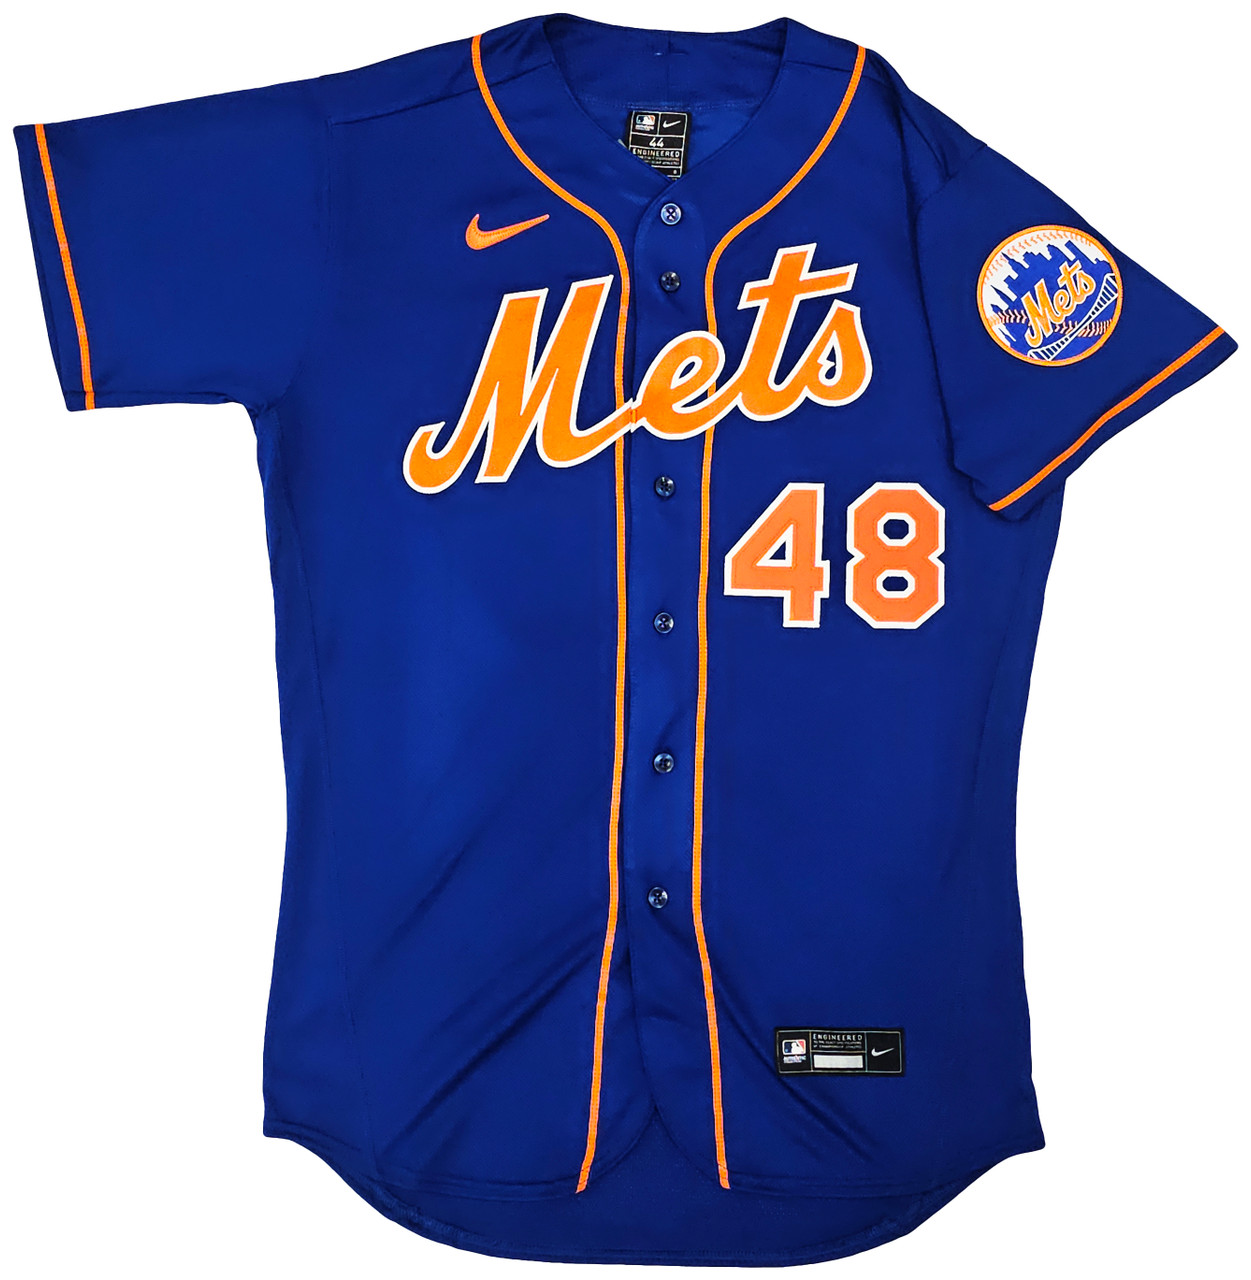 New York Mets Jacob deGrom Autographed Blue Nike Authentic Jersey Size 44 Fanatics Holo